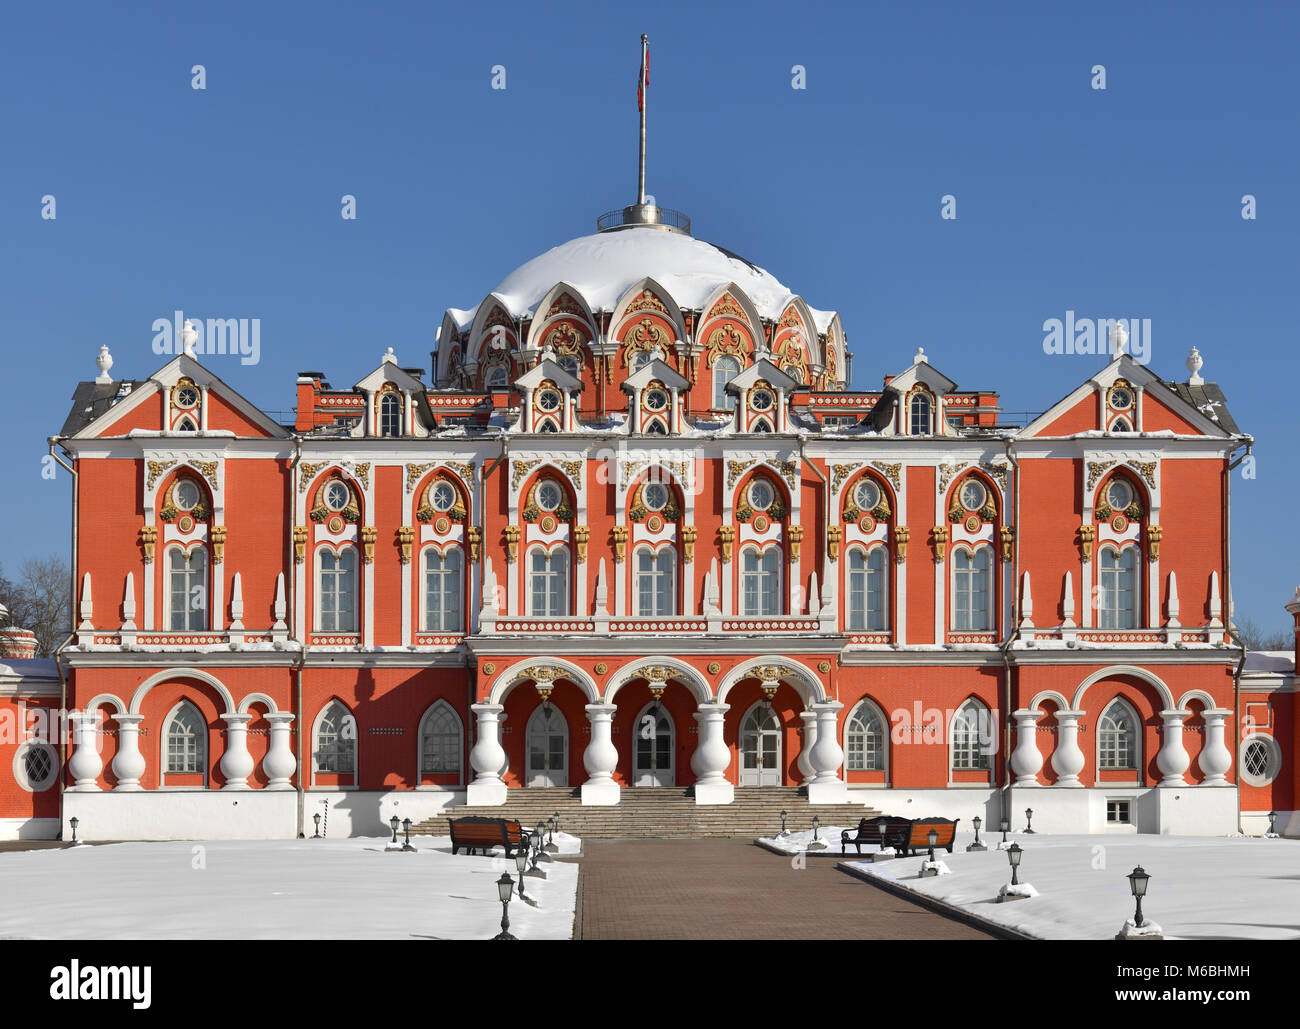 Petrovsky Palace was built for queen Catherine Great and designed by famous Russian architect Matvei Kazakov in 1775-82. Main building Stock Photo